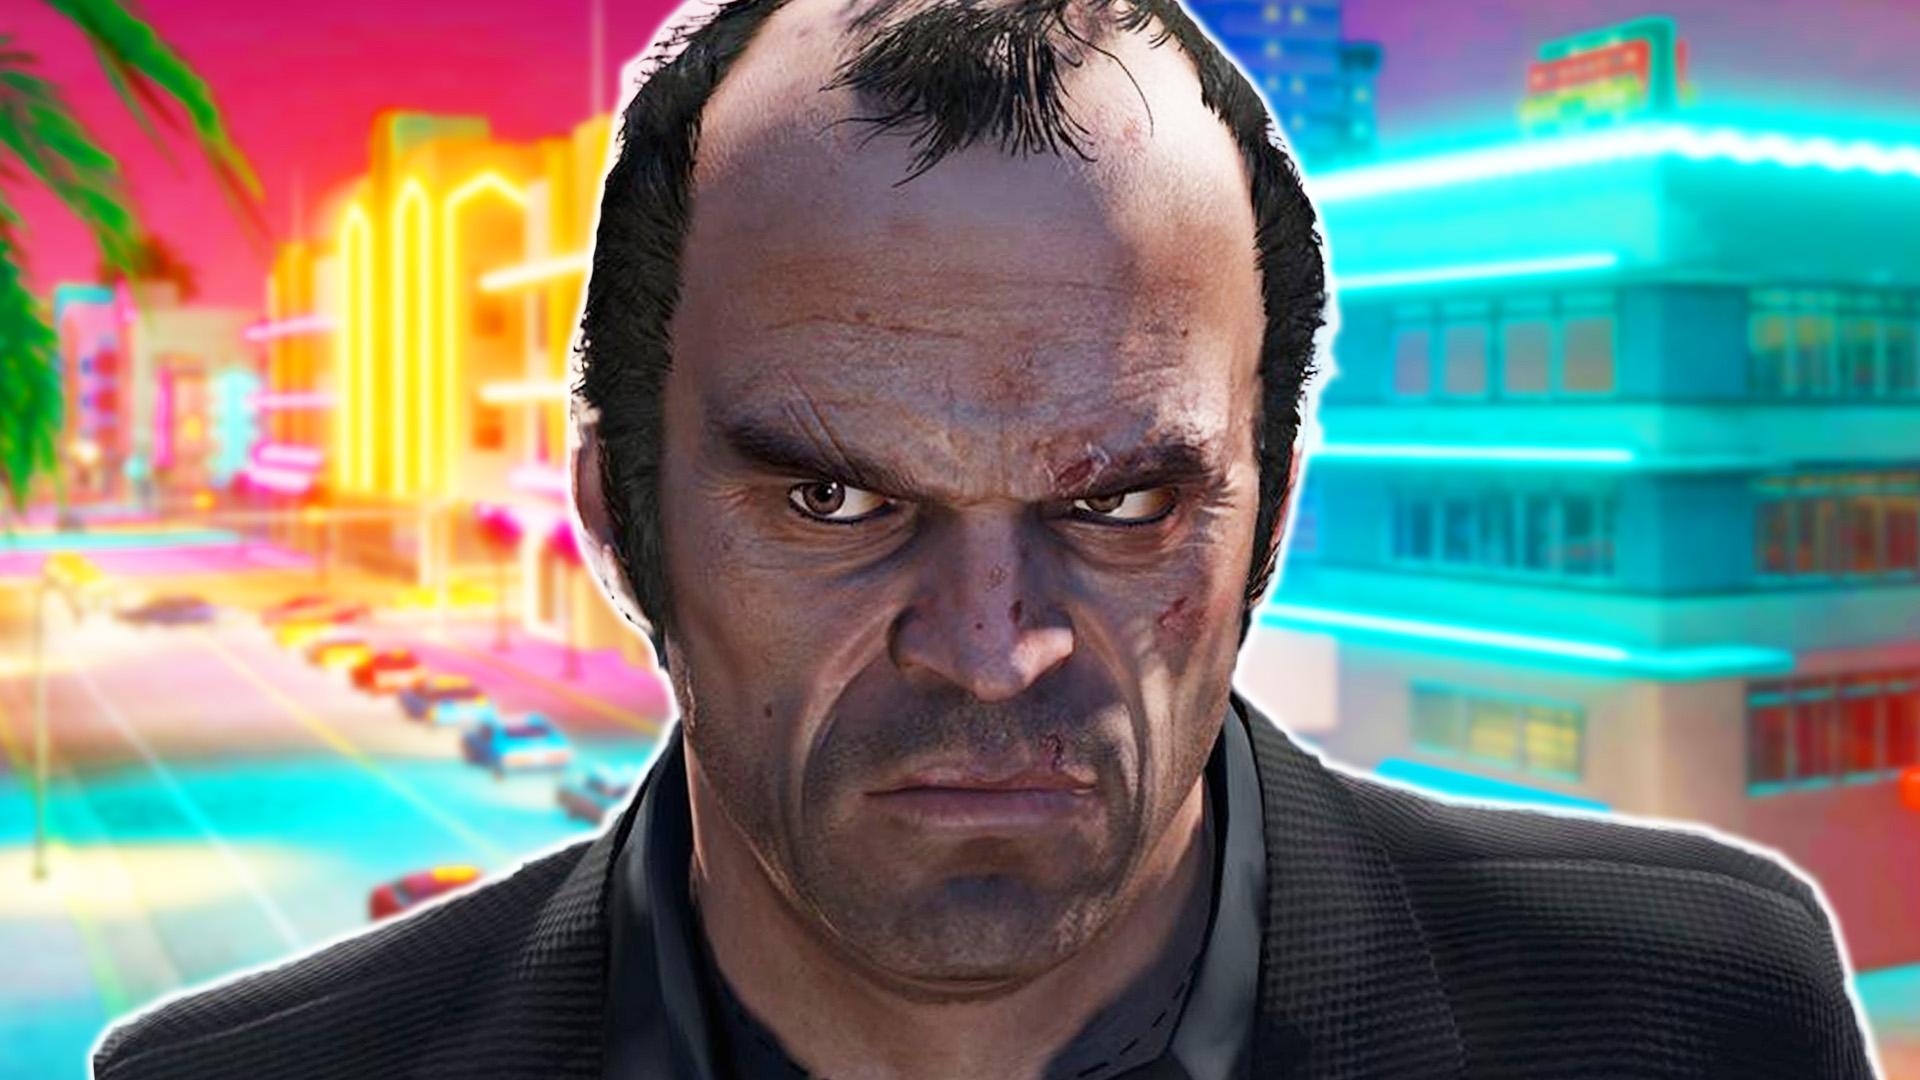 GTA 6 trailer shows up online days before rumoured reveal